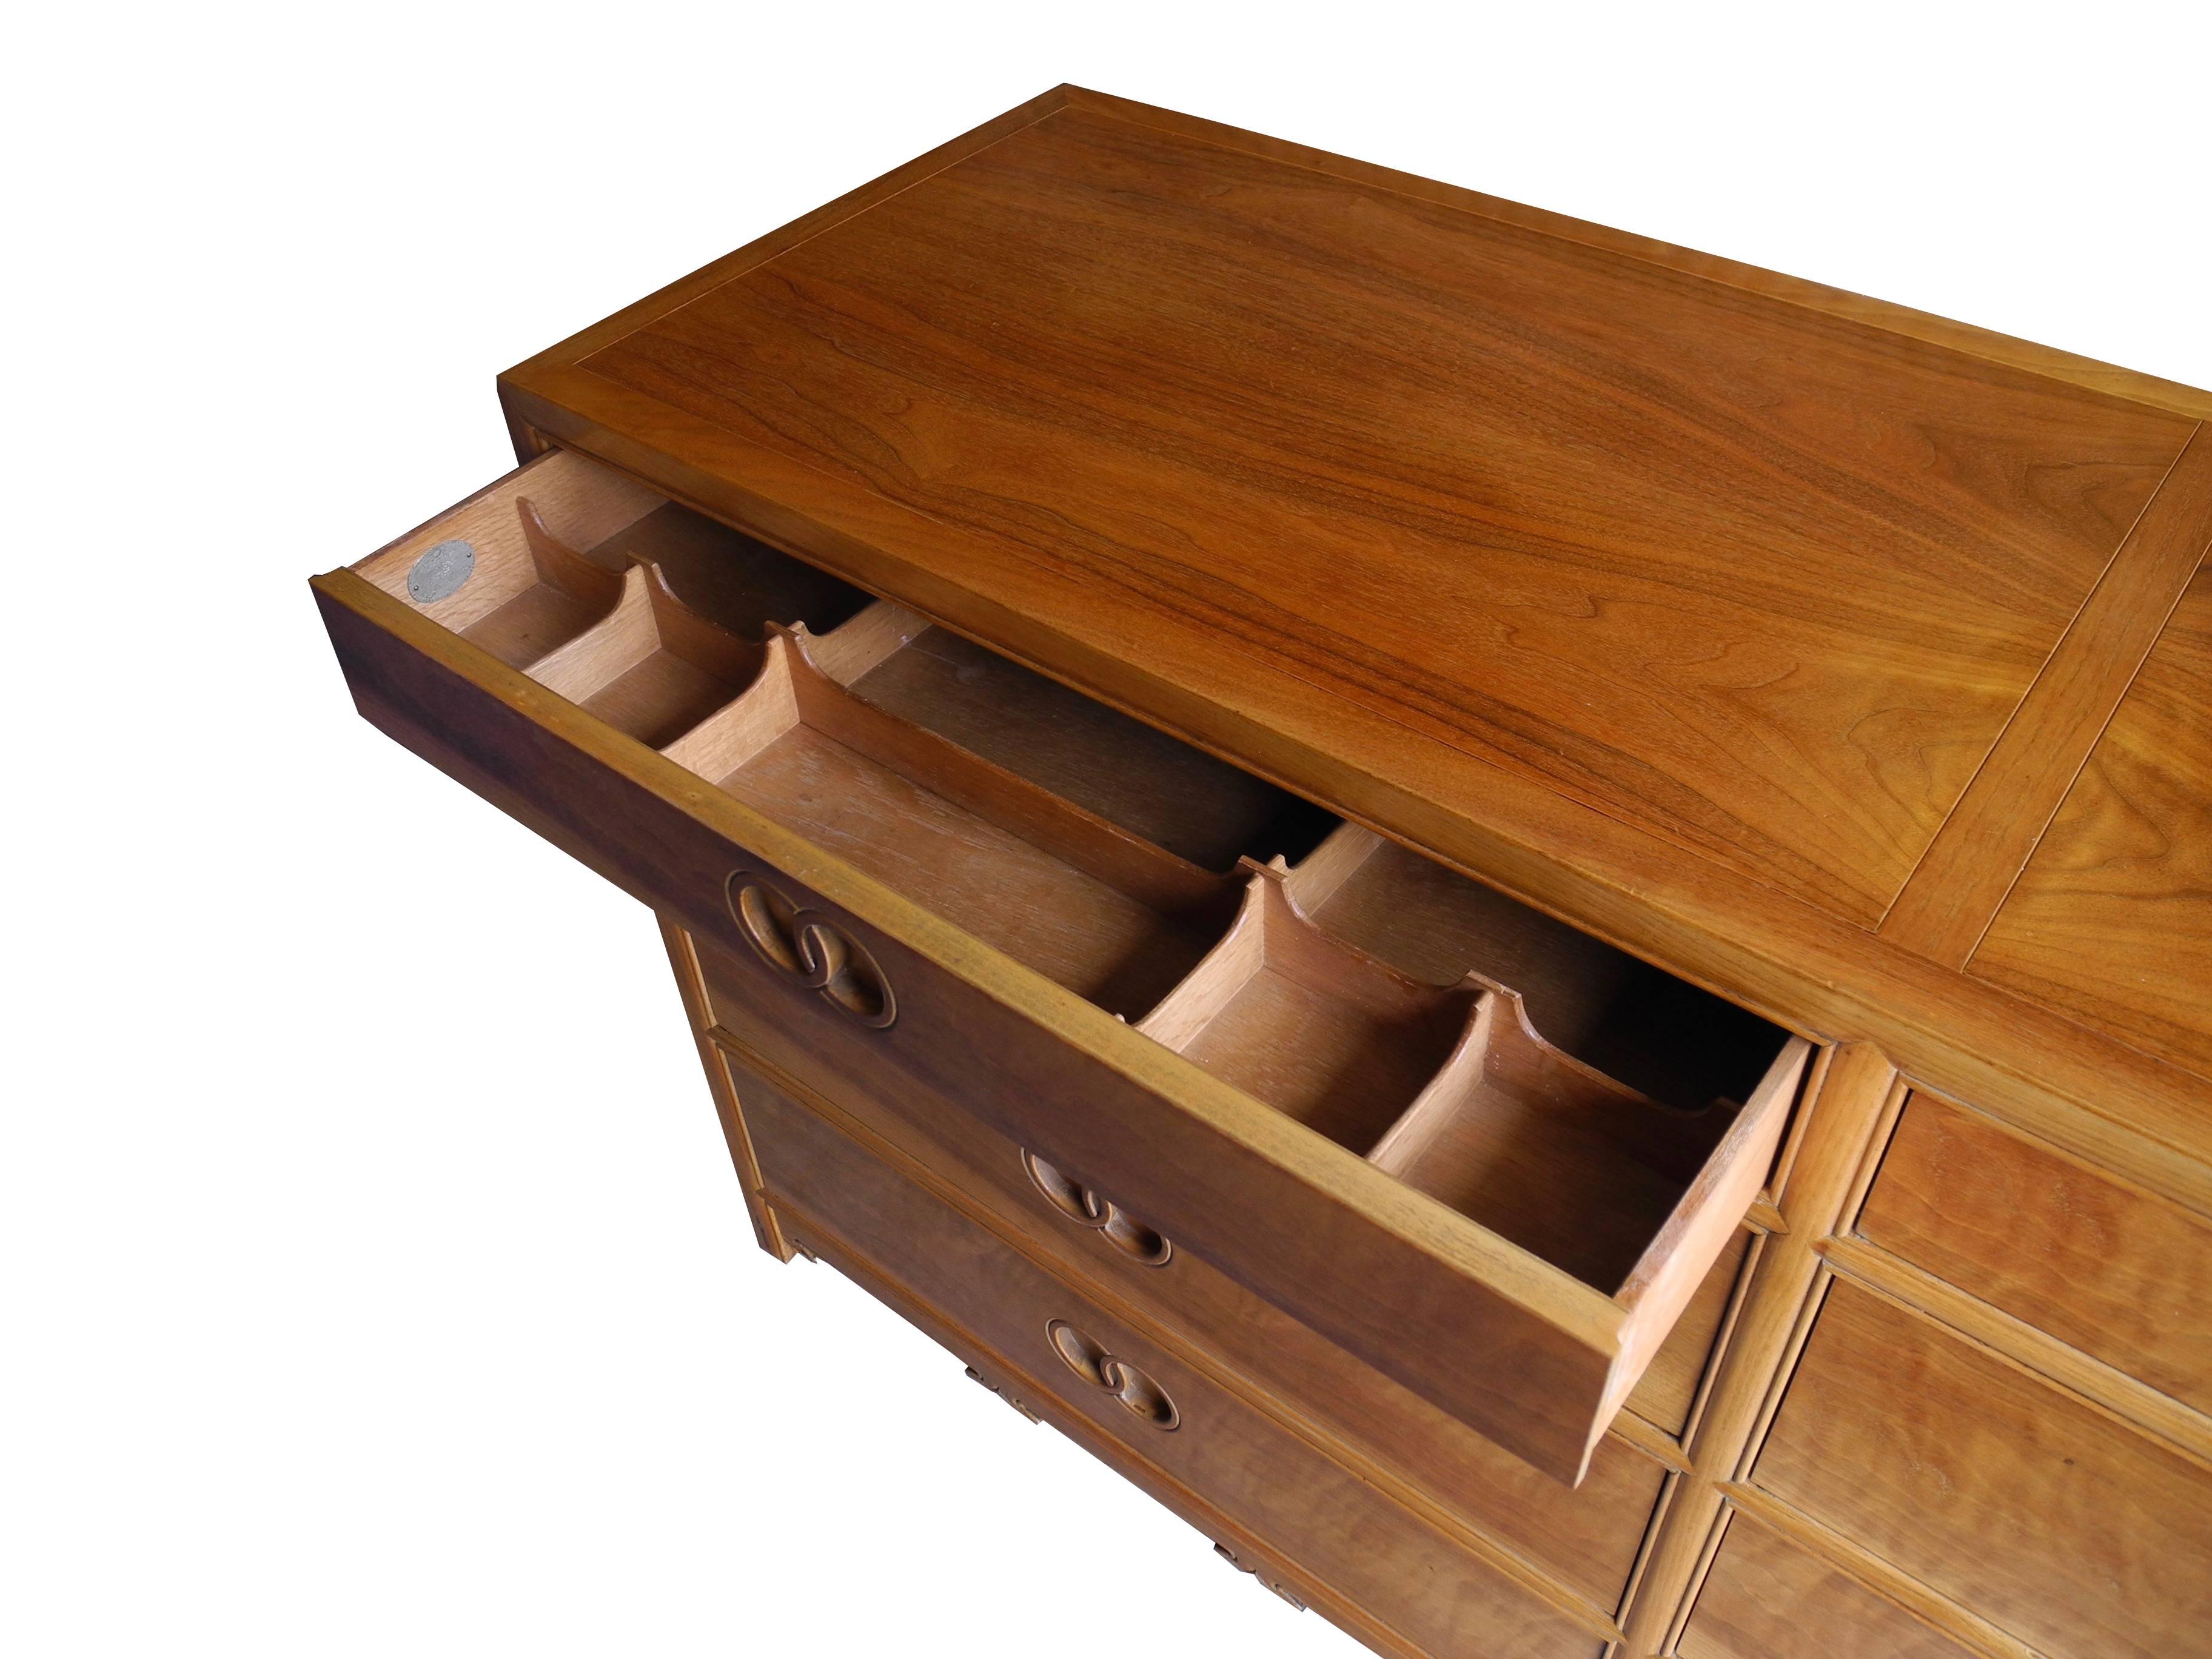 American Modern Eight-Drawer Walnut Dresser with Decorative Details by Michael Taylor